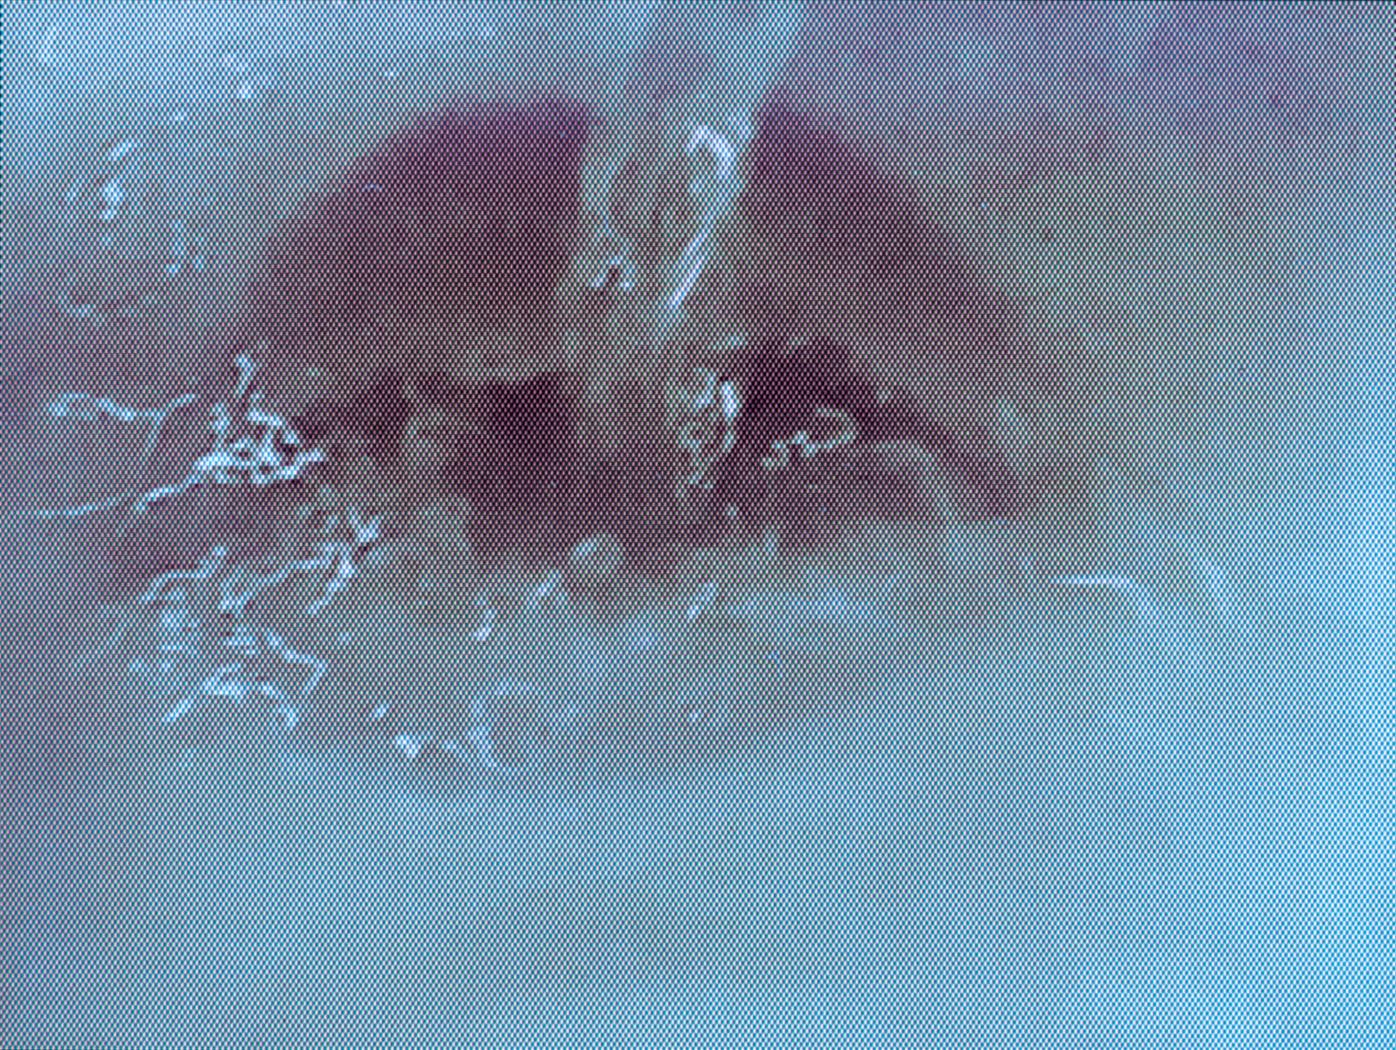 A stream of water pours into an open mouth, splashing out the sides.